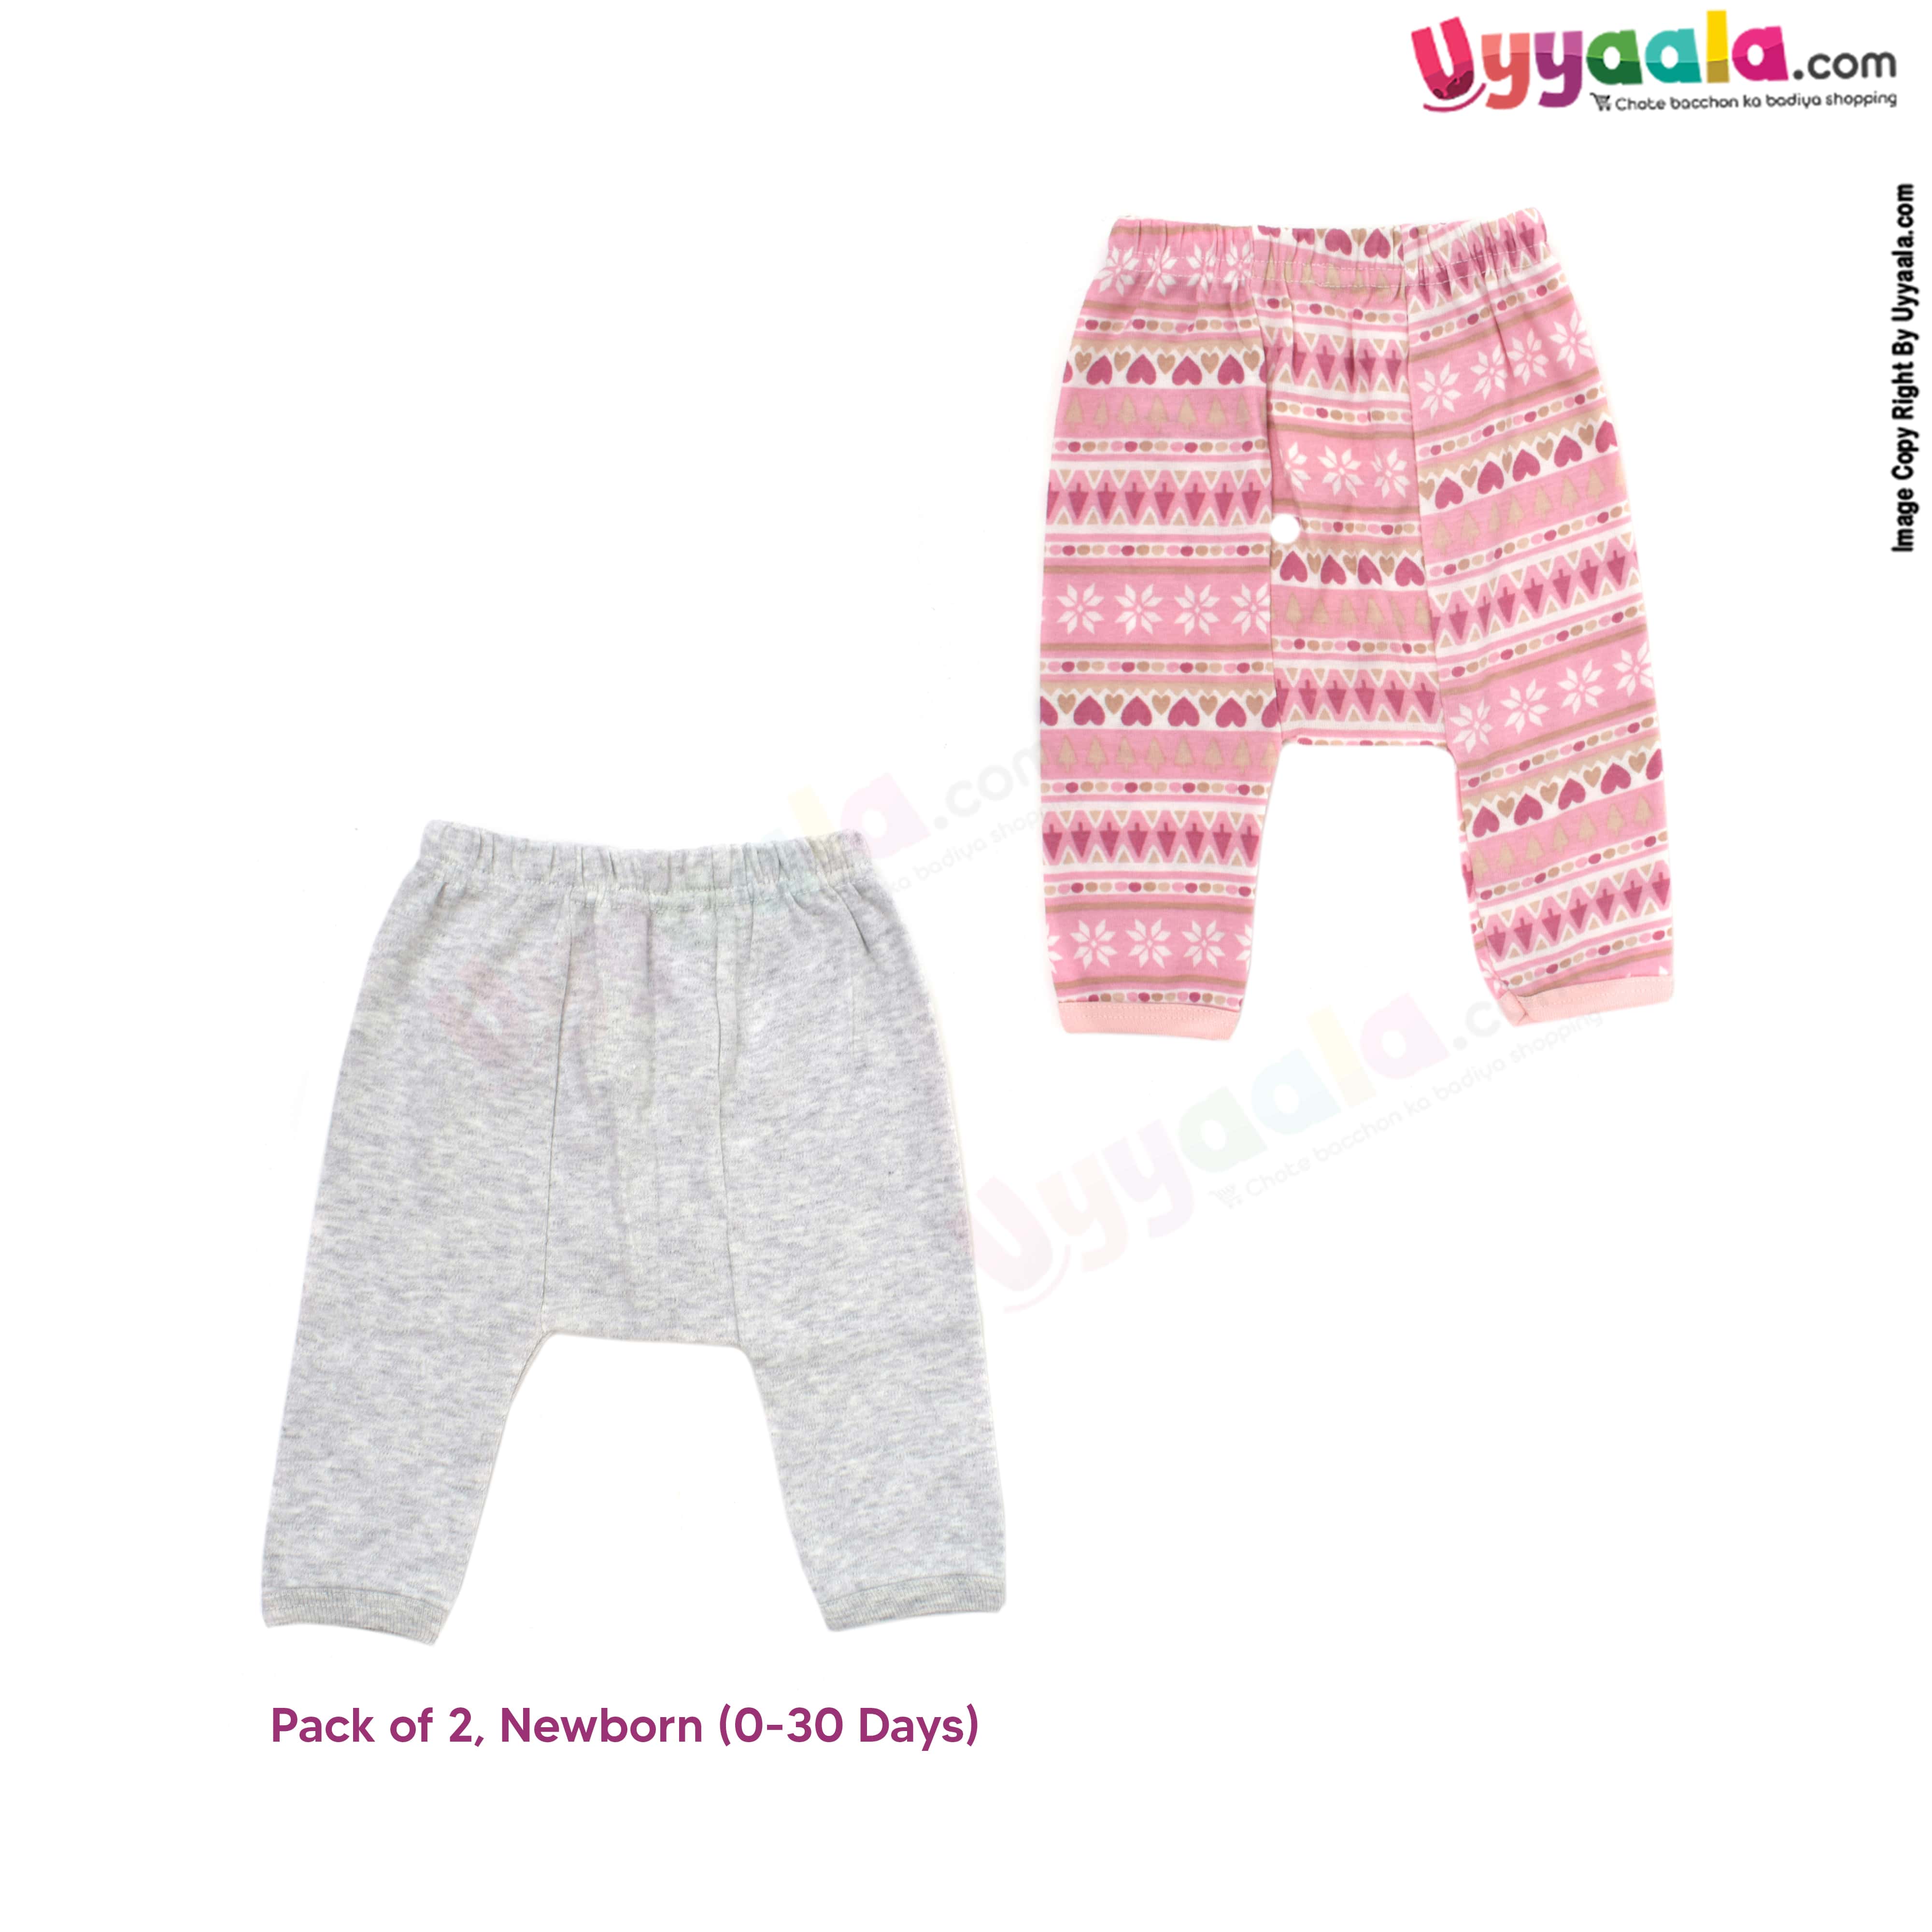 PRECIOUS ONE diaper pants 100% soft hosiery cotton pack of 2 - gray & pink with assorted prints (newborn)